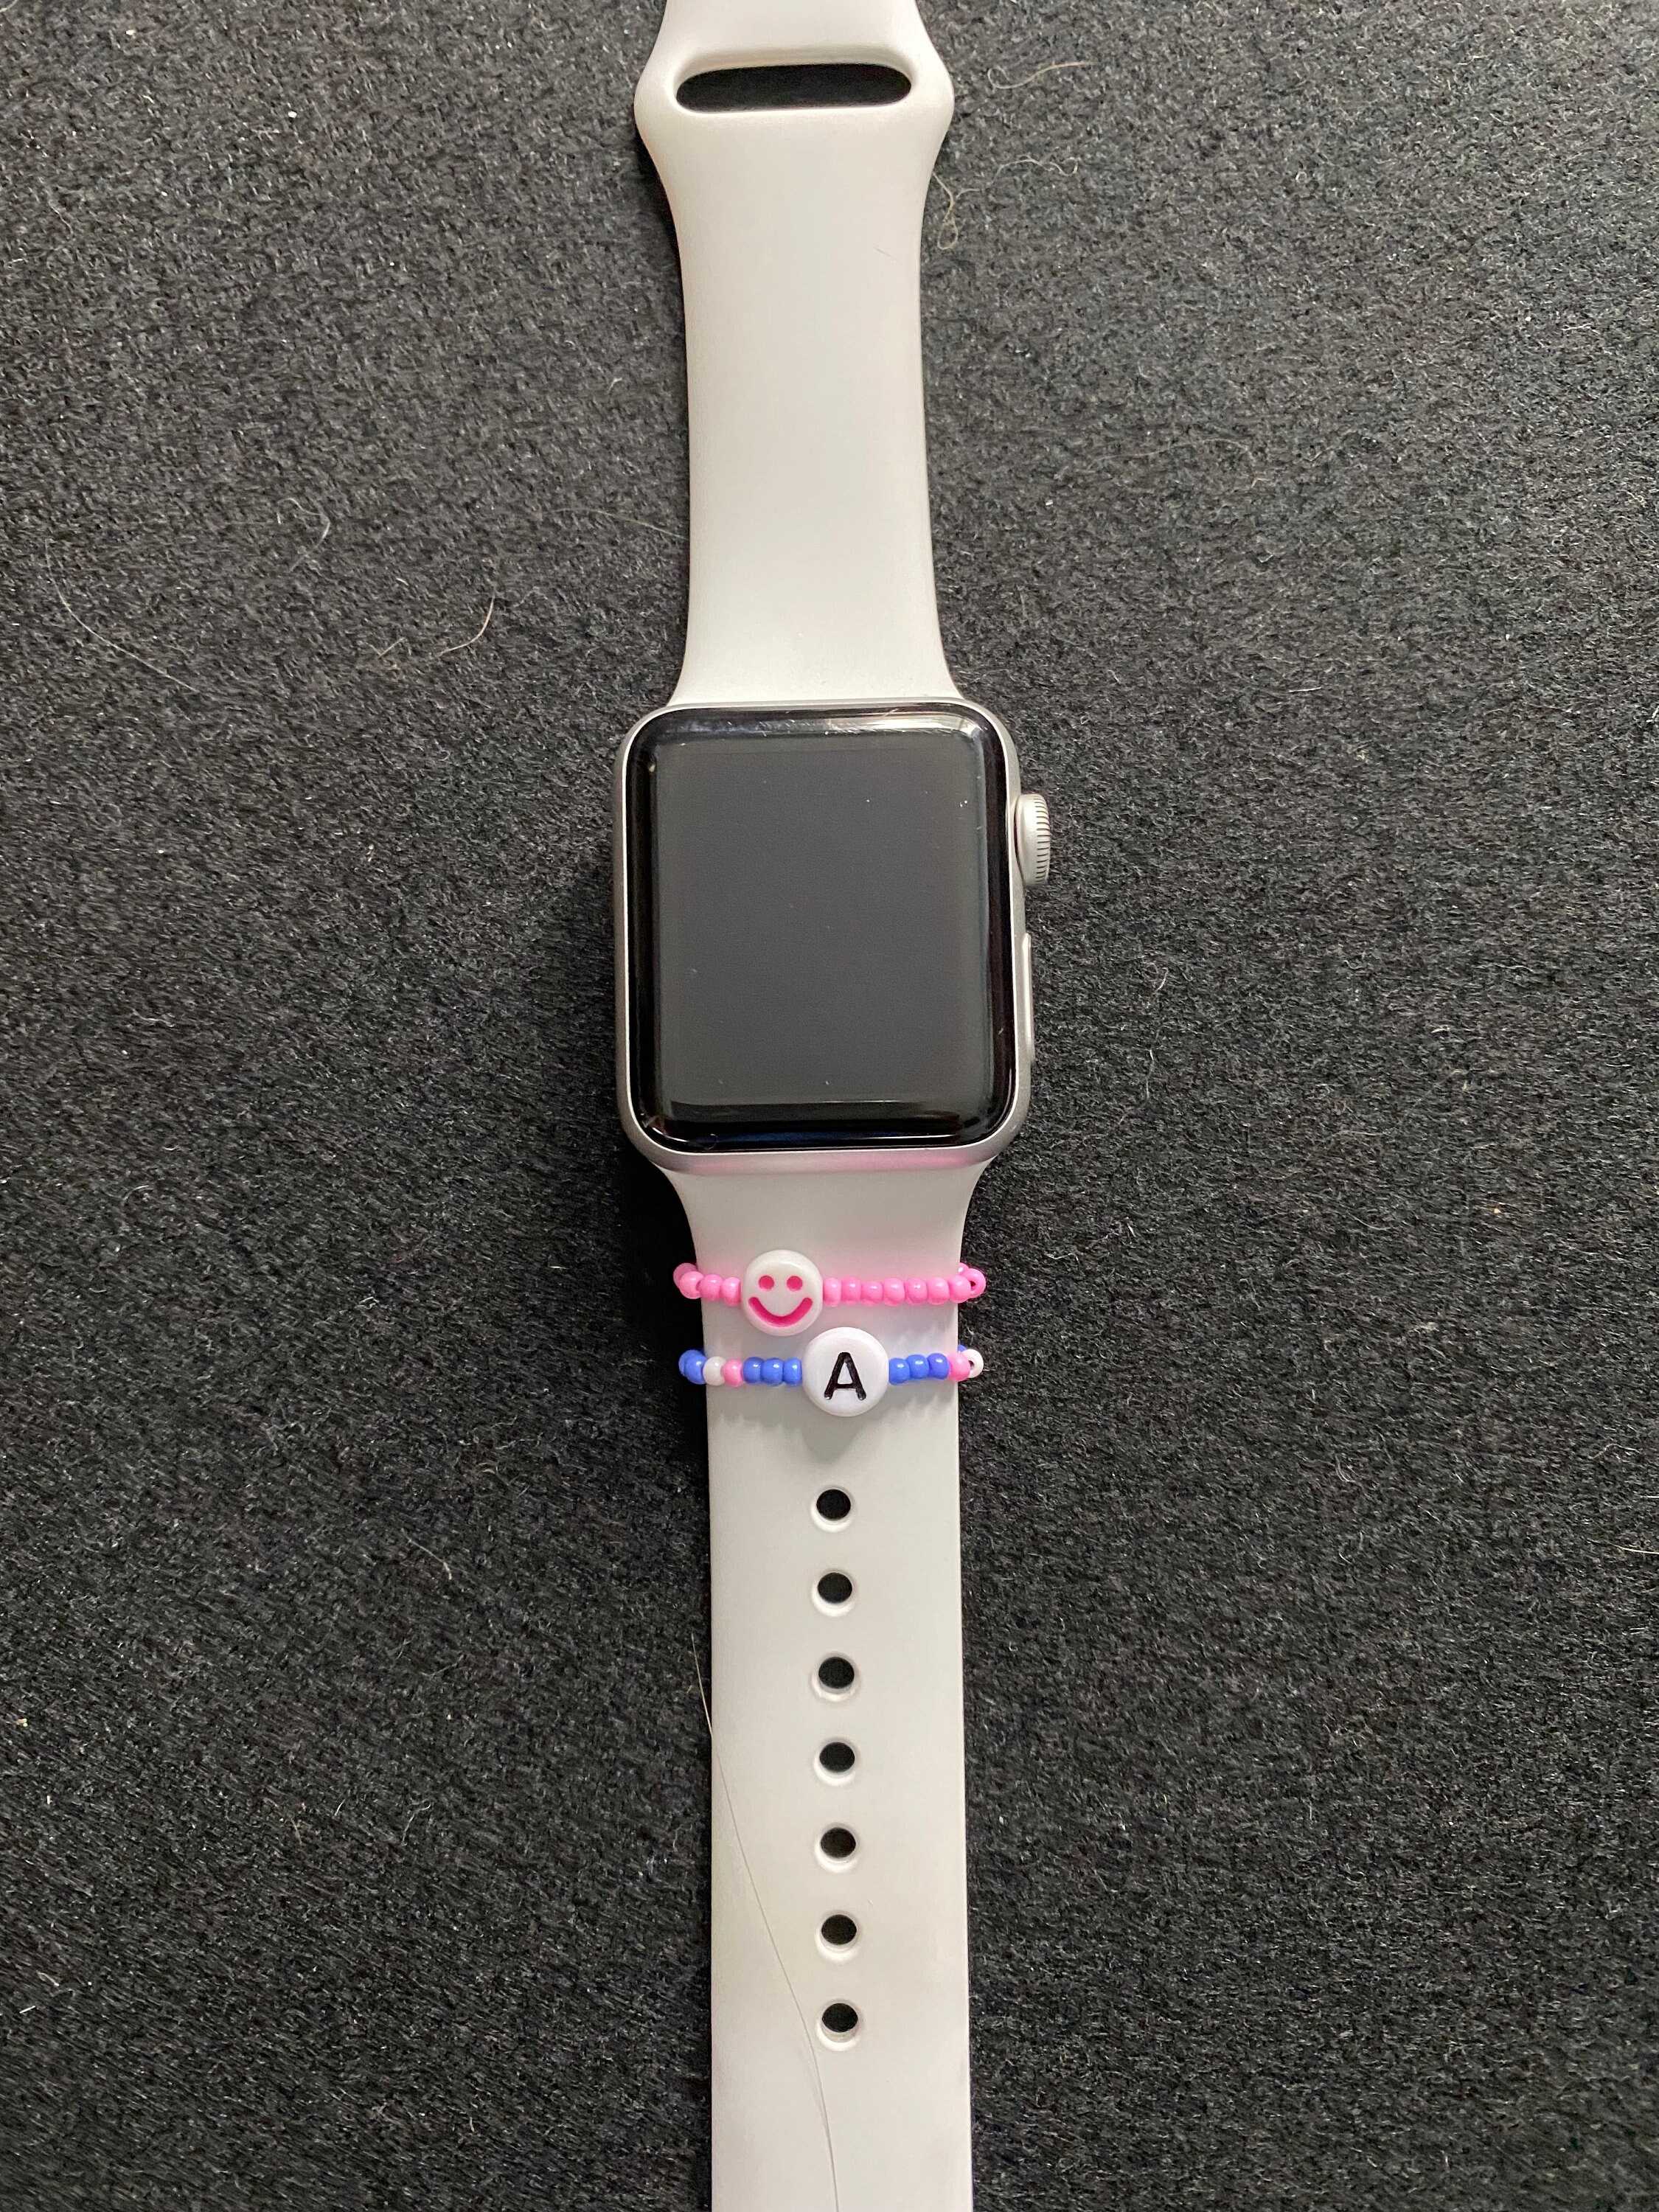 Preppy Apple Watch Bands to Match Your Personal Style  Society6